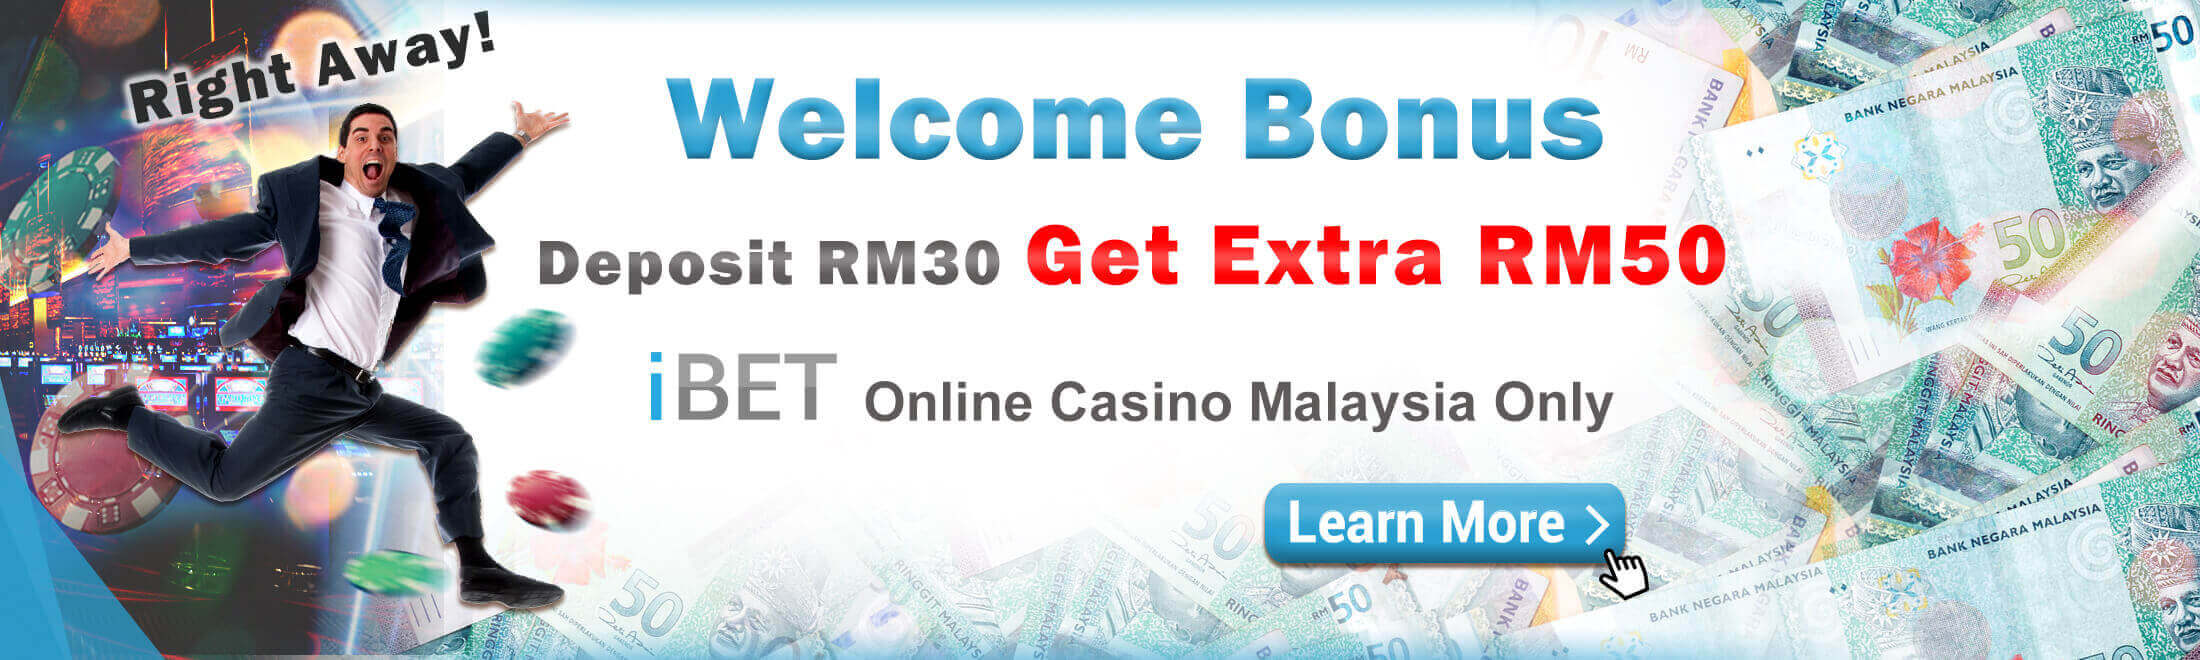 918Kiss(SCR888) Slot Game Deposit RM 30 Free RM 50 Promotion